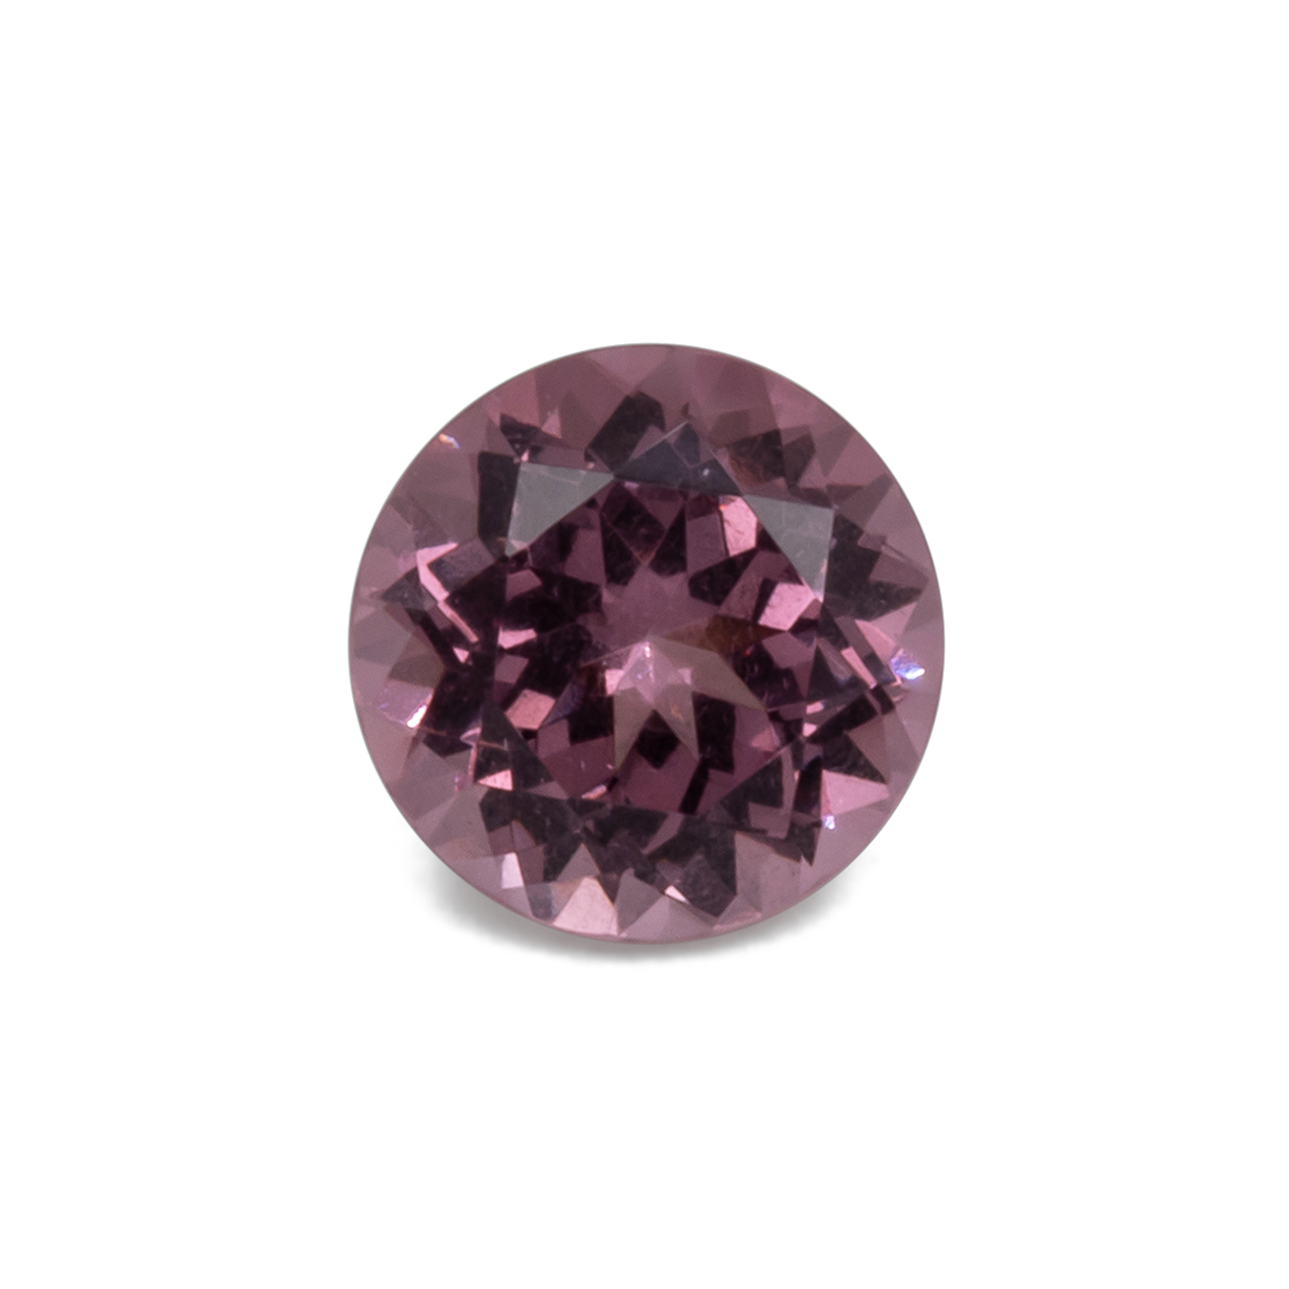 Spinell - rosa, rund, 5,1x5,1 mm, 0,56 cts, Nr. SP90020